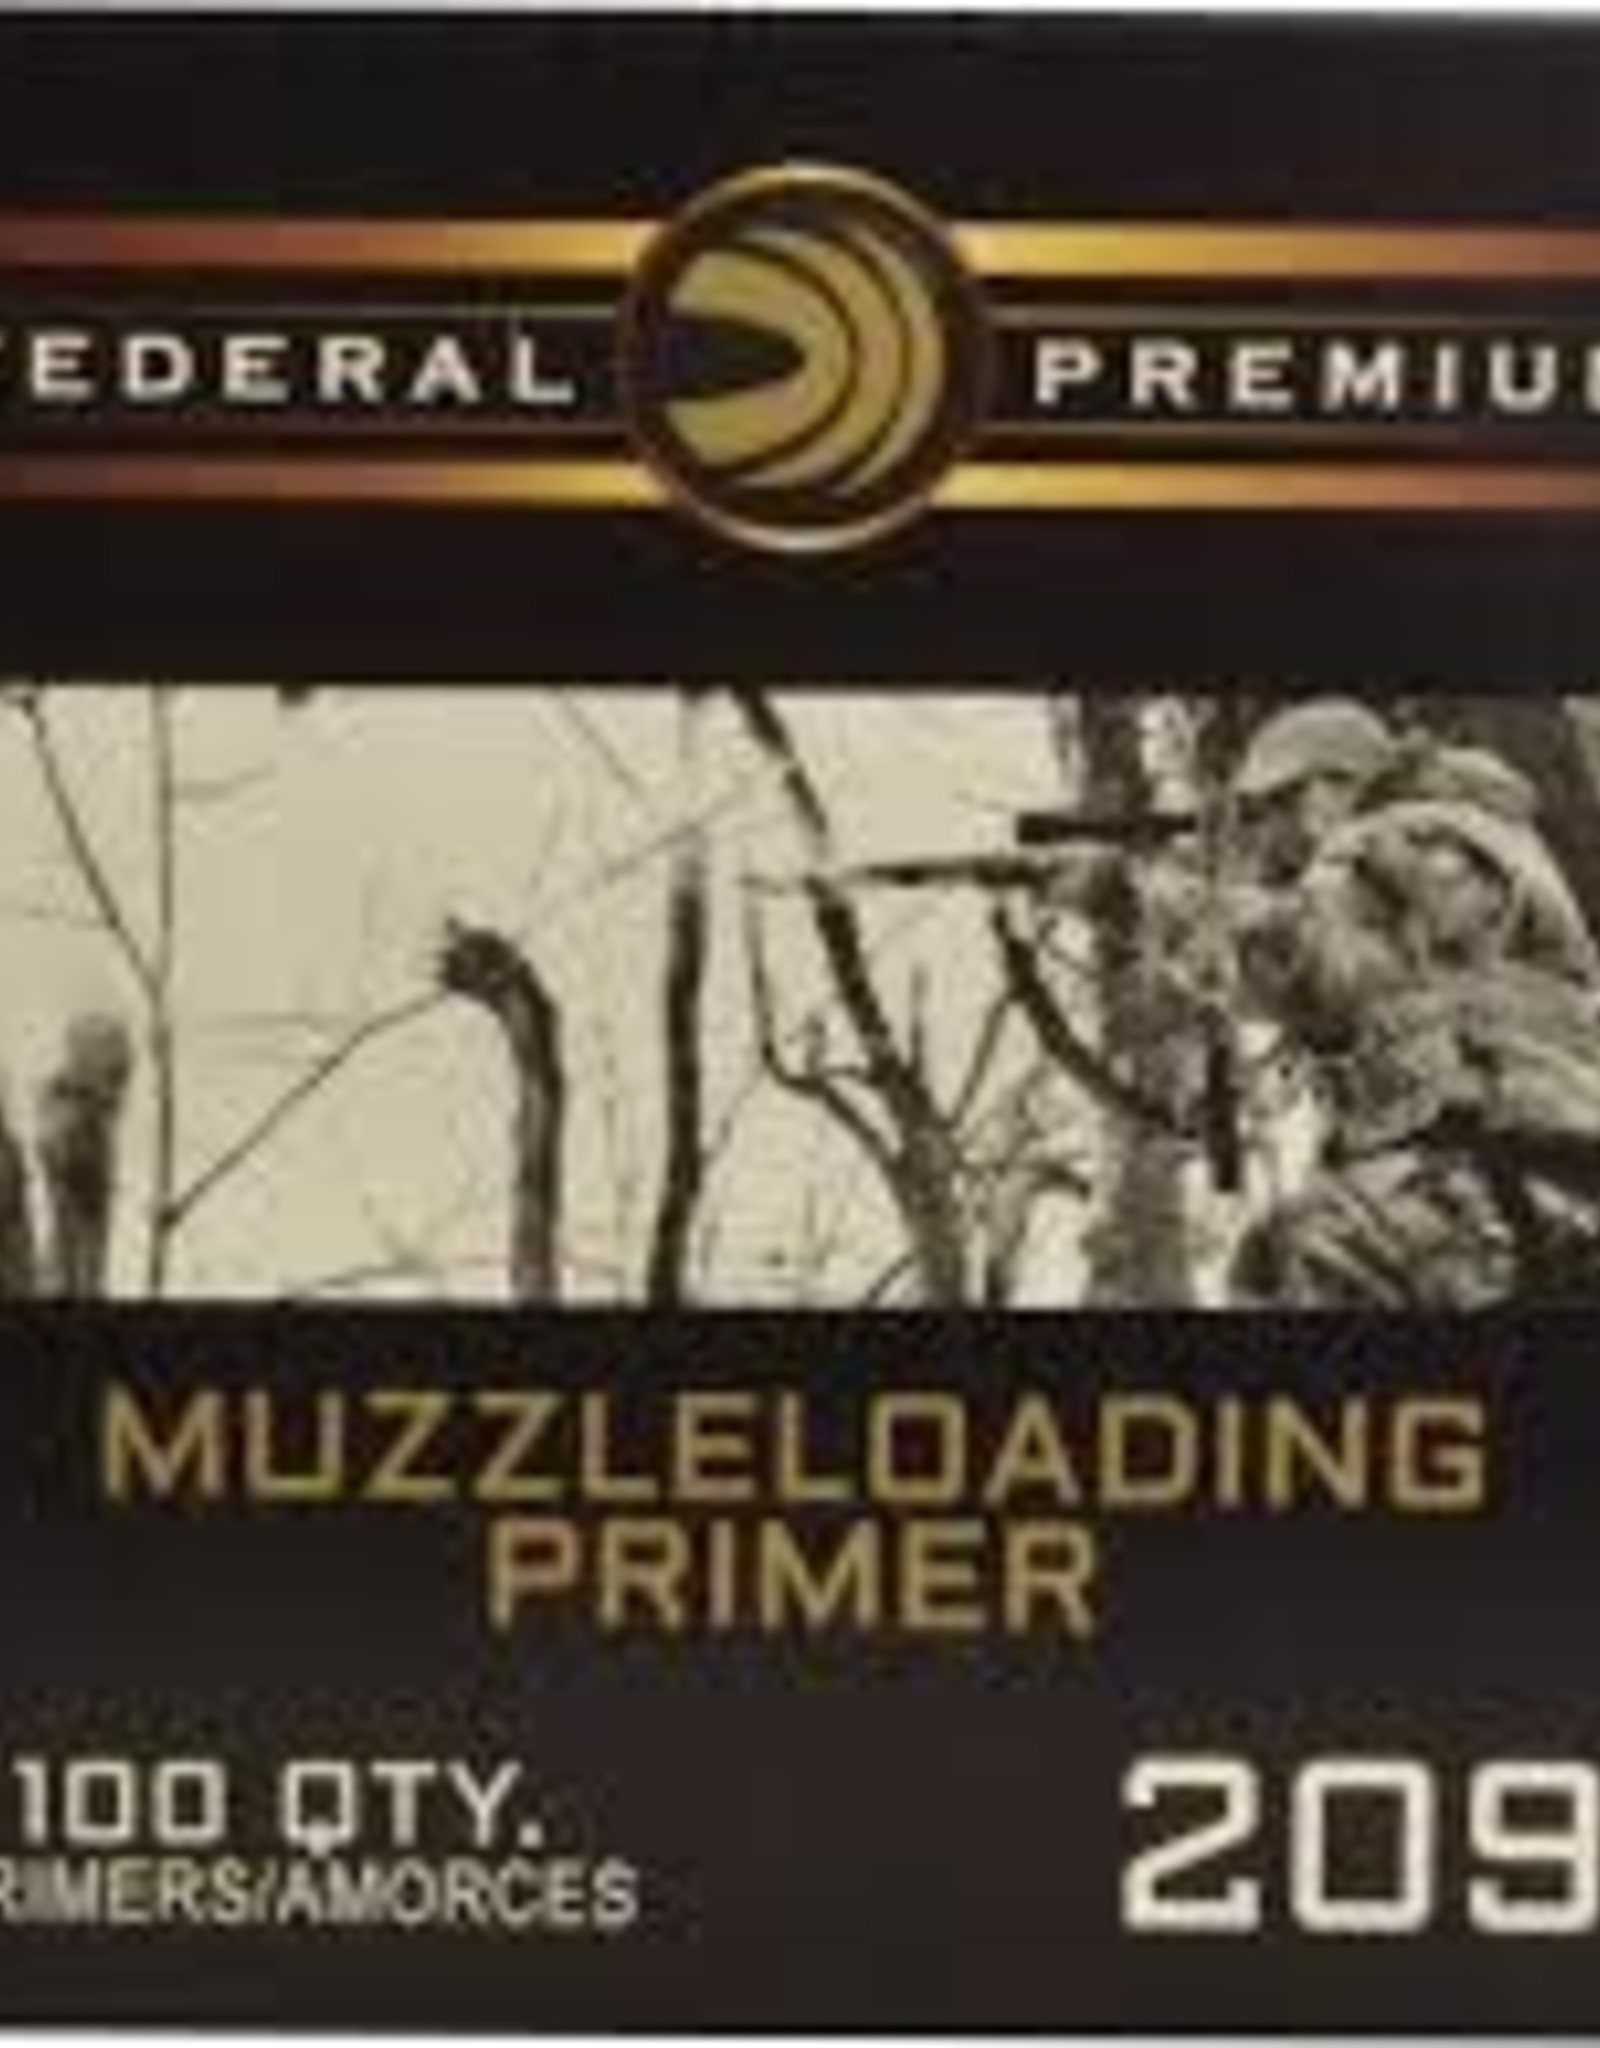 Federal Muzzle Loading Primers 209